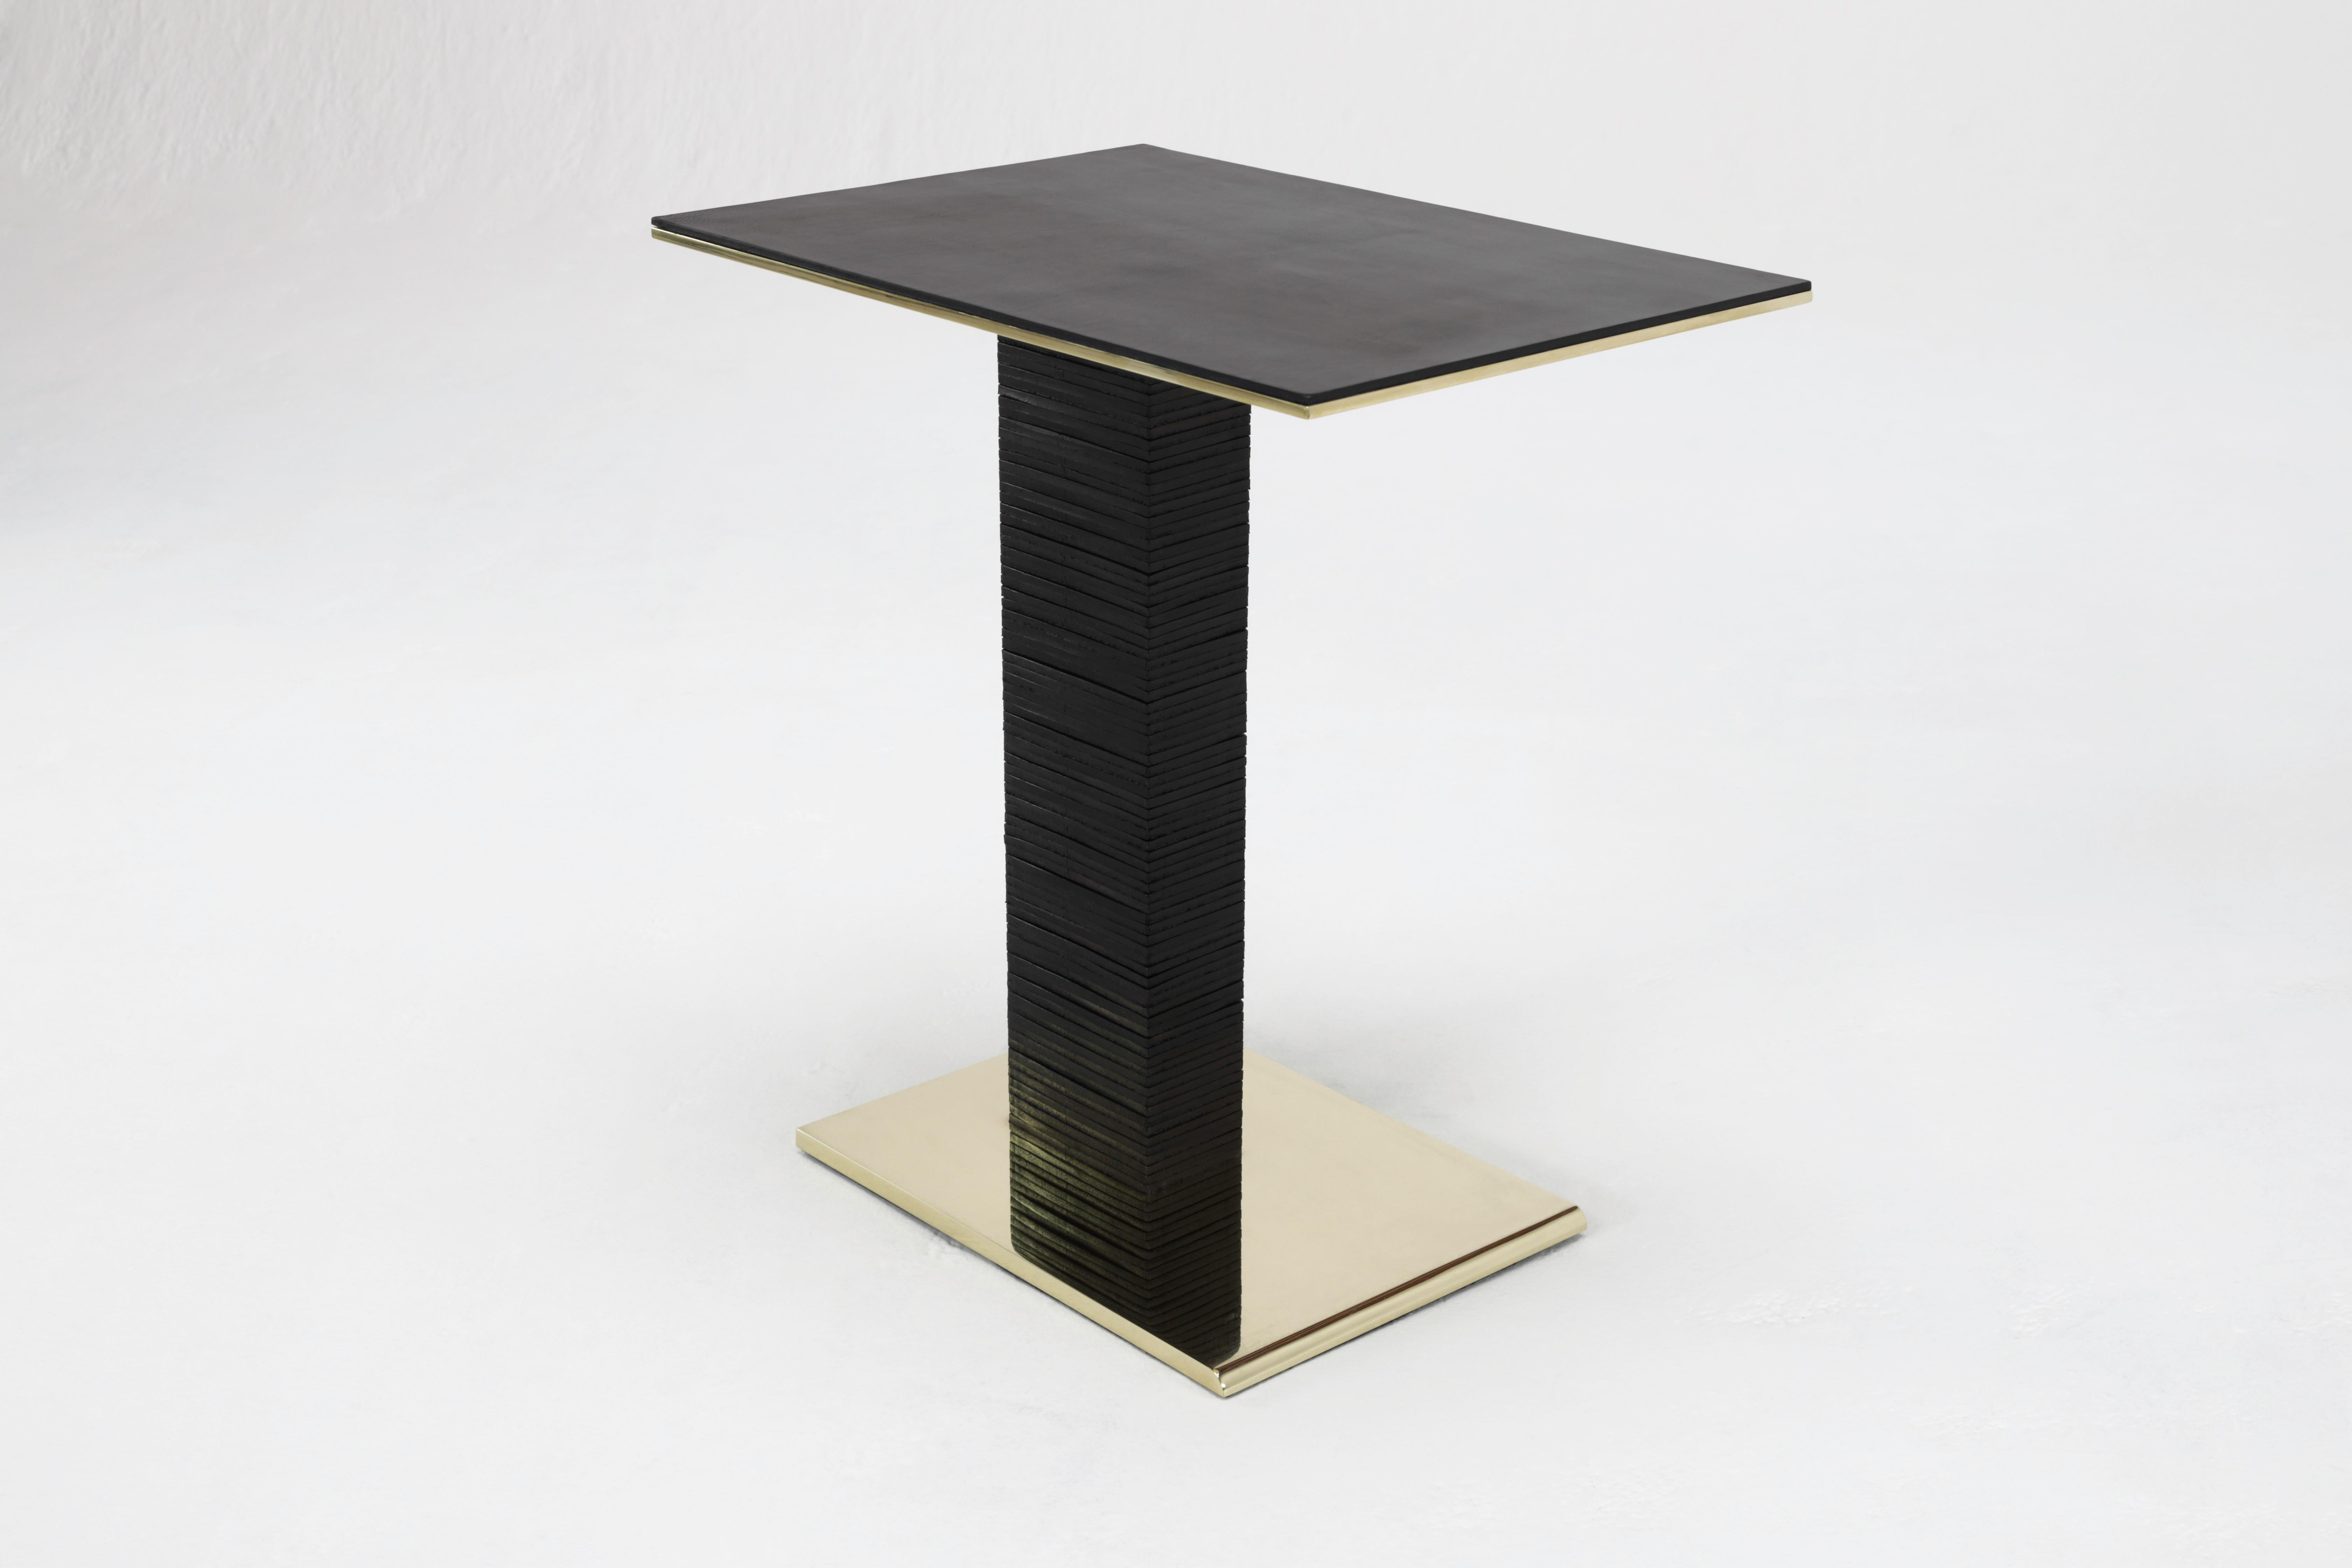 The Cantilever Infinity side table was inspired by Paul Dupré-Lafon's use of stacked leather in his designs for Hermès. The base is solid brass, beveled at the front, and mirror polished on all sides. Over eighty pieces of leather are stacked to